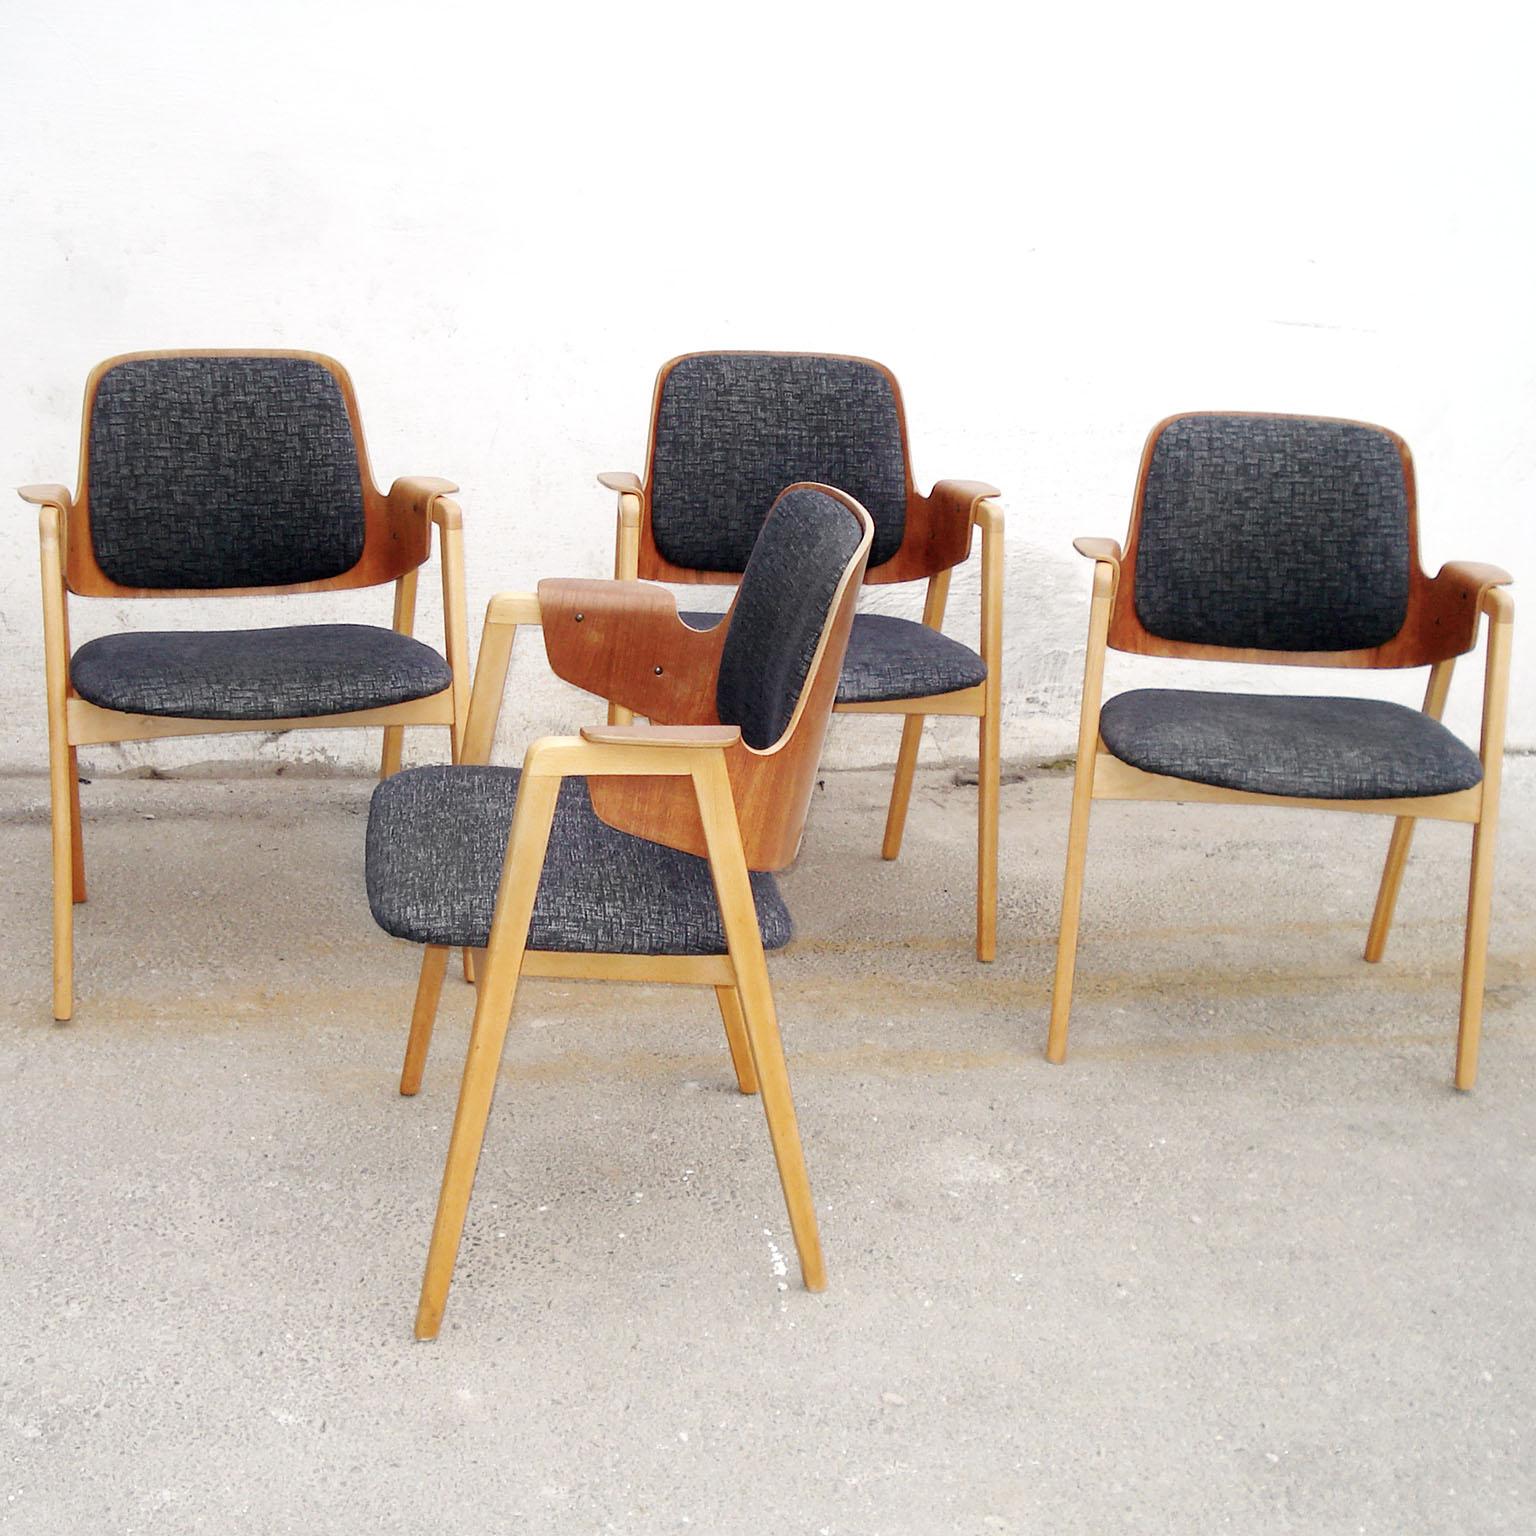 Set of 4 Elias Barup Teak Dining Chairs with Original Upholstery, 1950s Sweden In Good Condition For Sale In Bochum, NRW